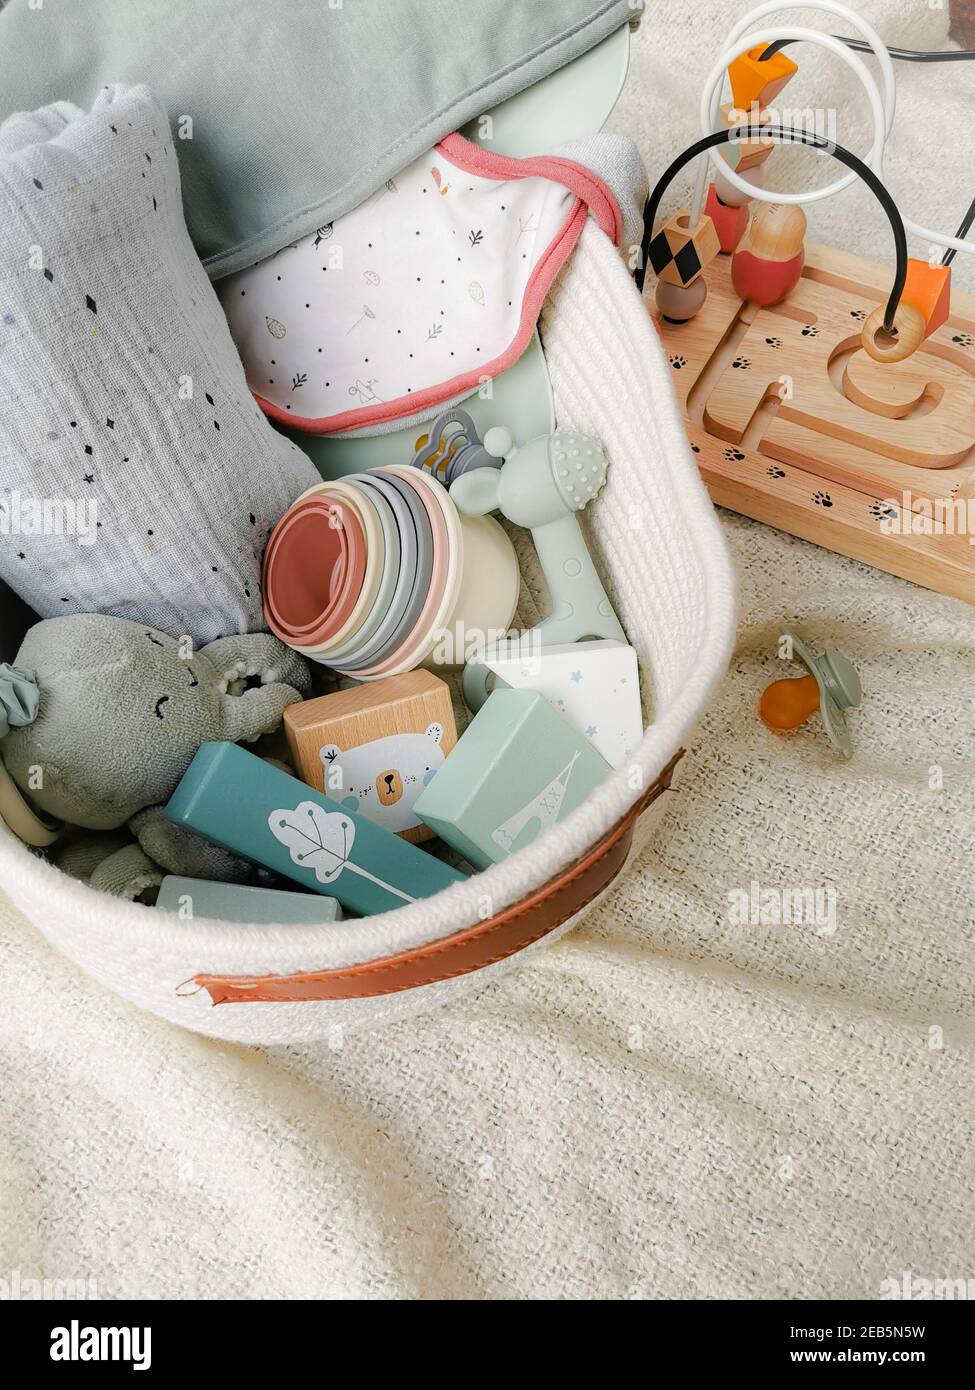 Gift set for a baby shower with toys in soft gender-neutral colors such as blocks, teething toy, ... . Gender neutral parenting concept. Stock Photo